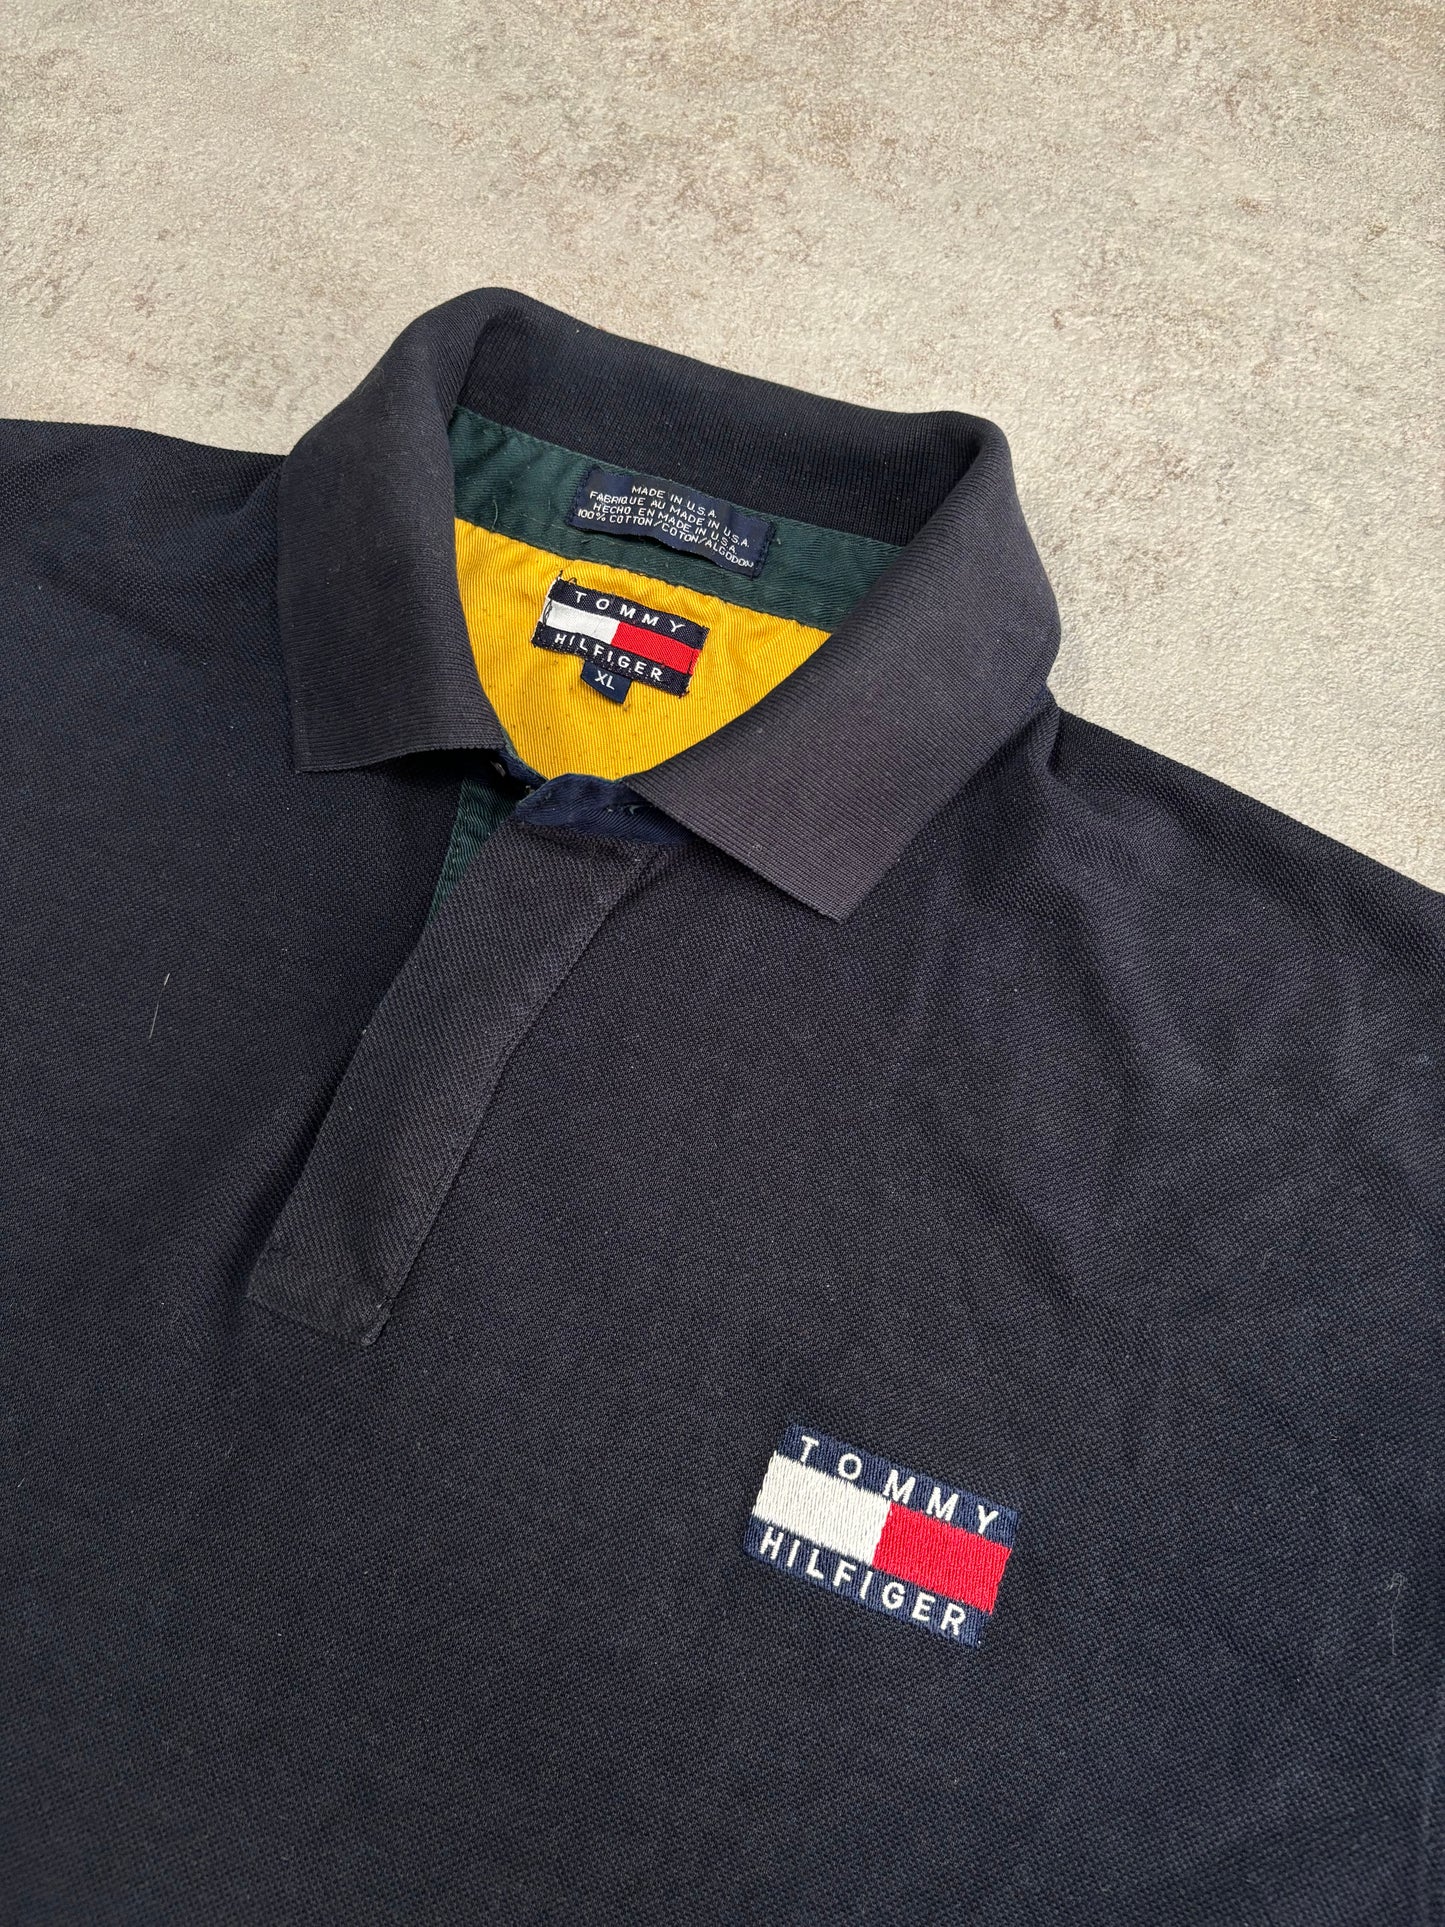 Polo Tommy Hilfiger 90s Vintage - XL